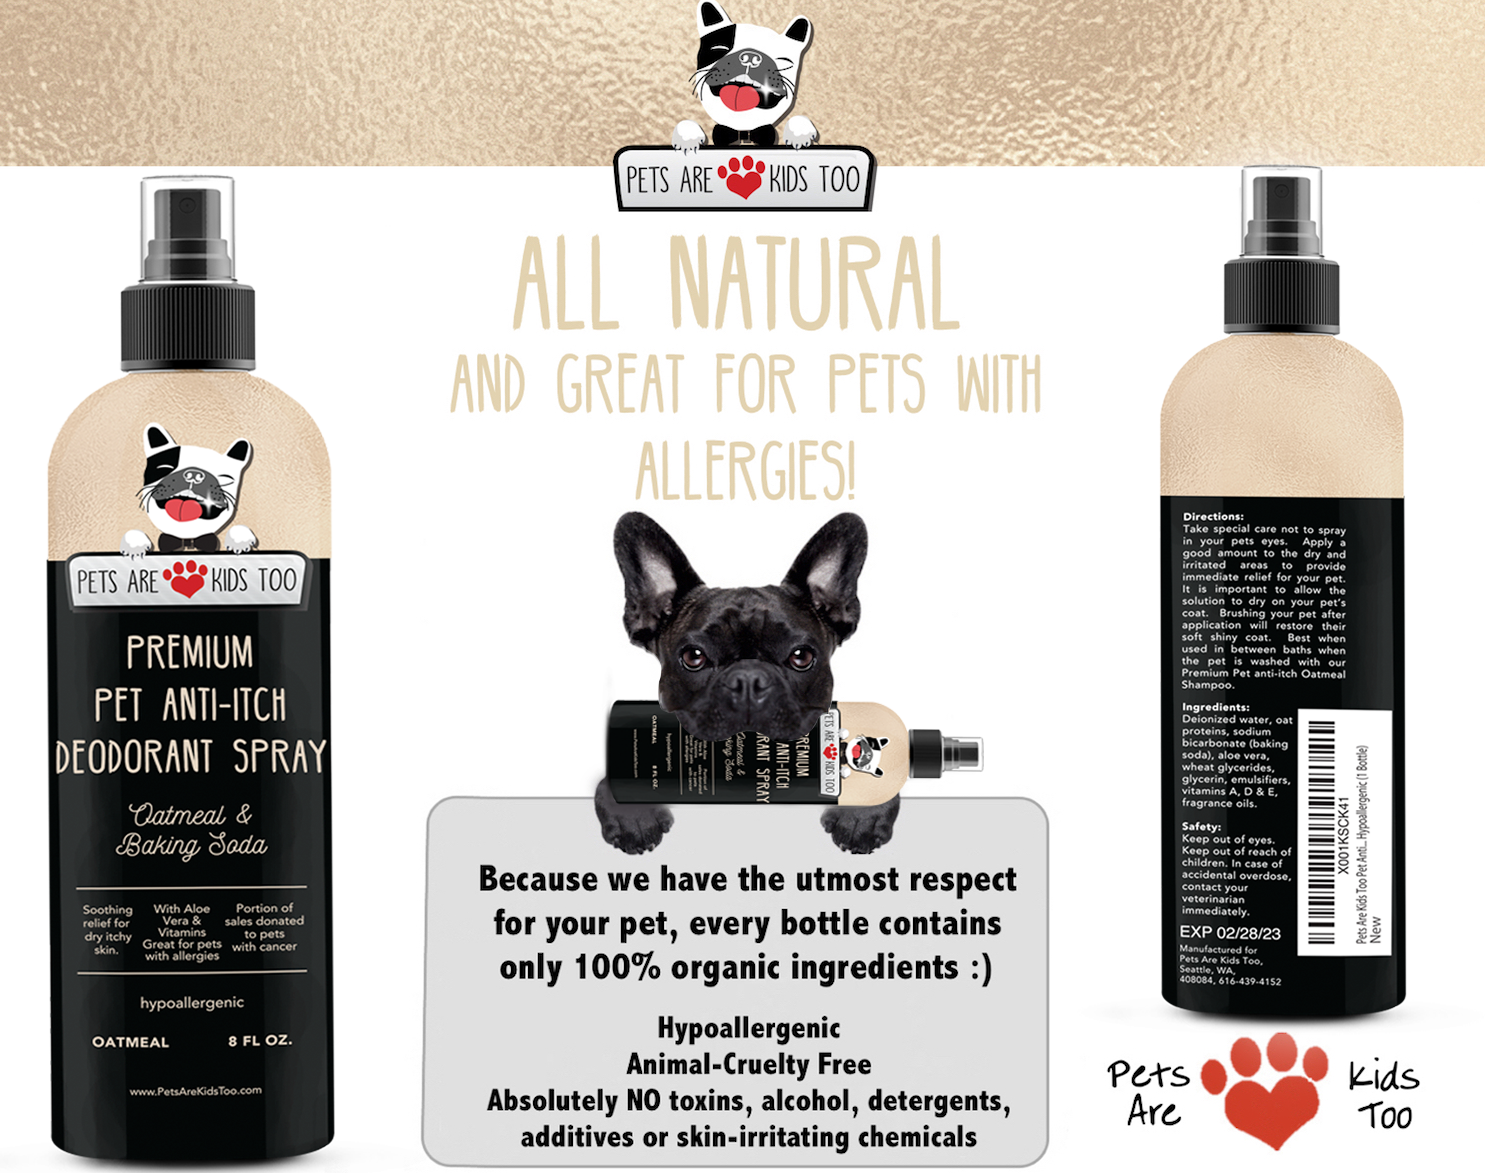 All natural and great for dogs with allergies